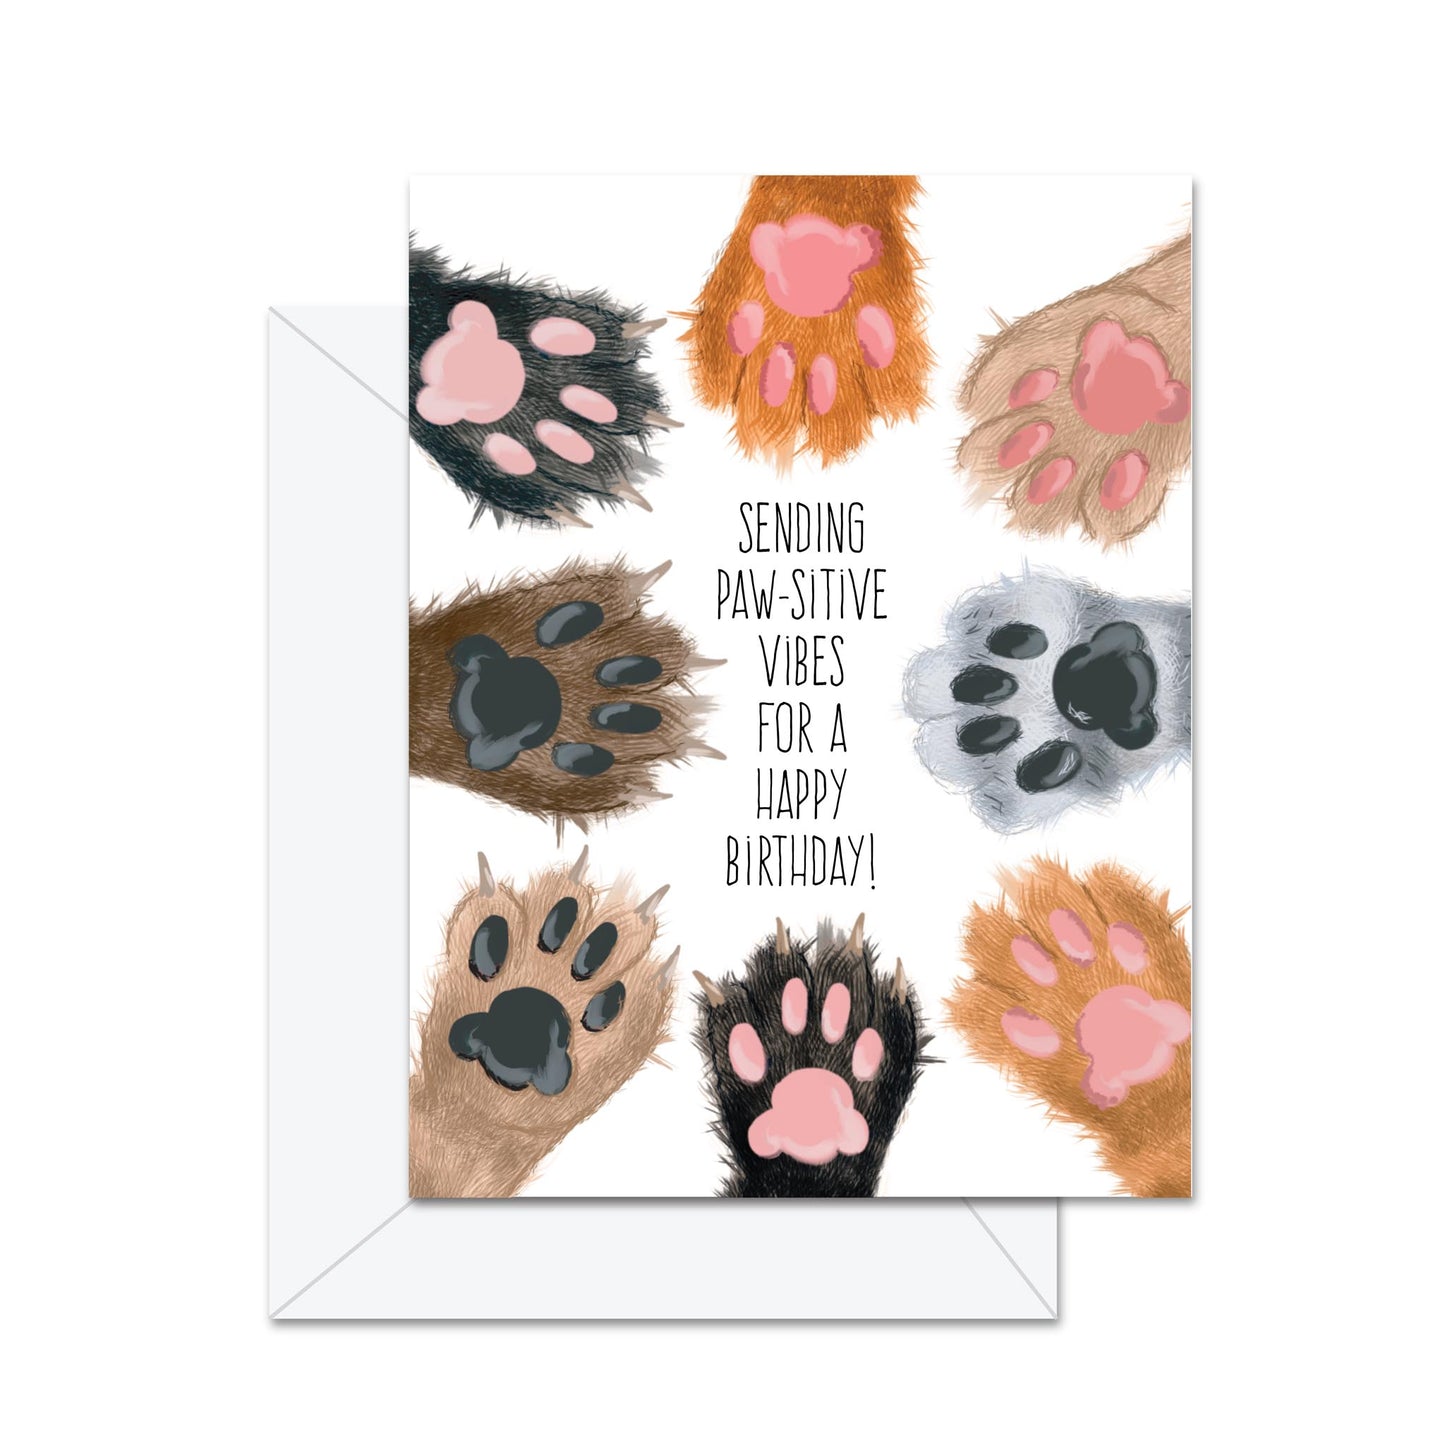 Sending Paw-sitive Vibes For A Happy Birthday! - Greeting Card